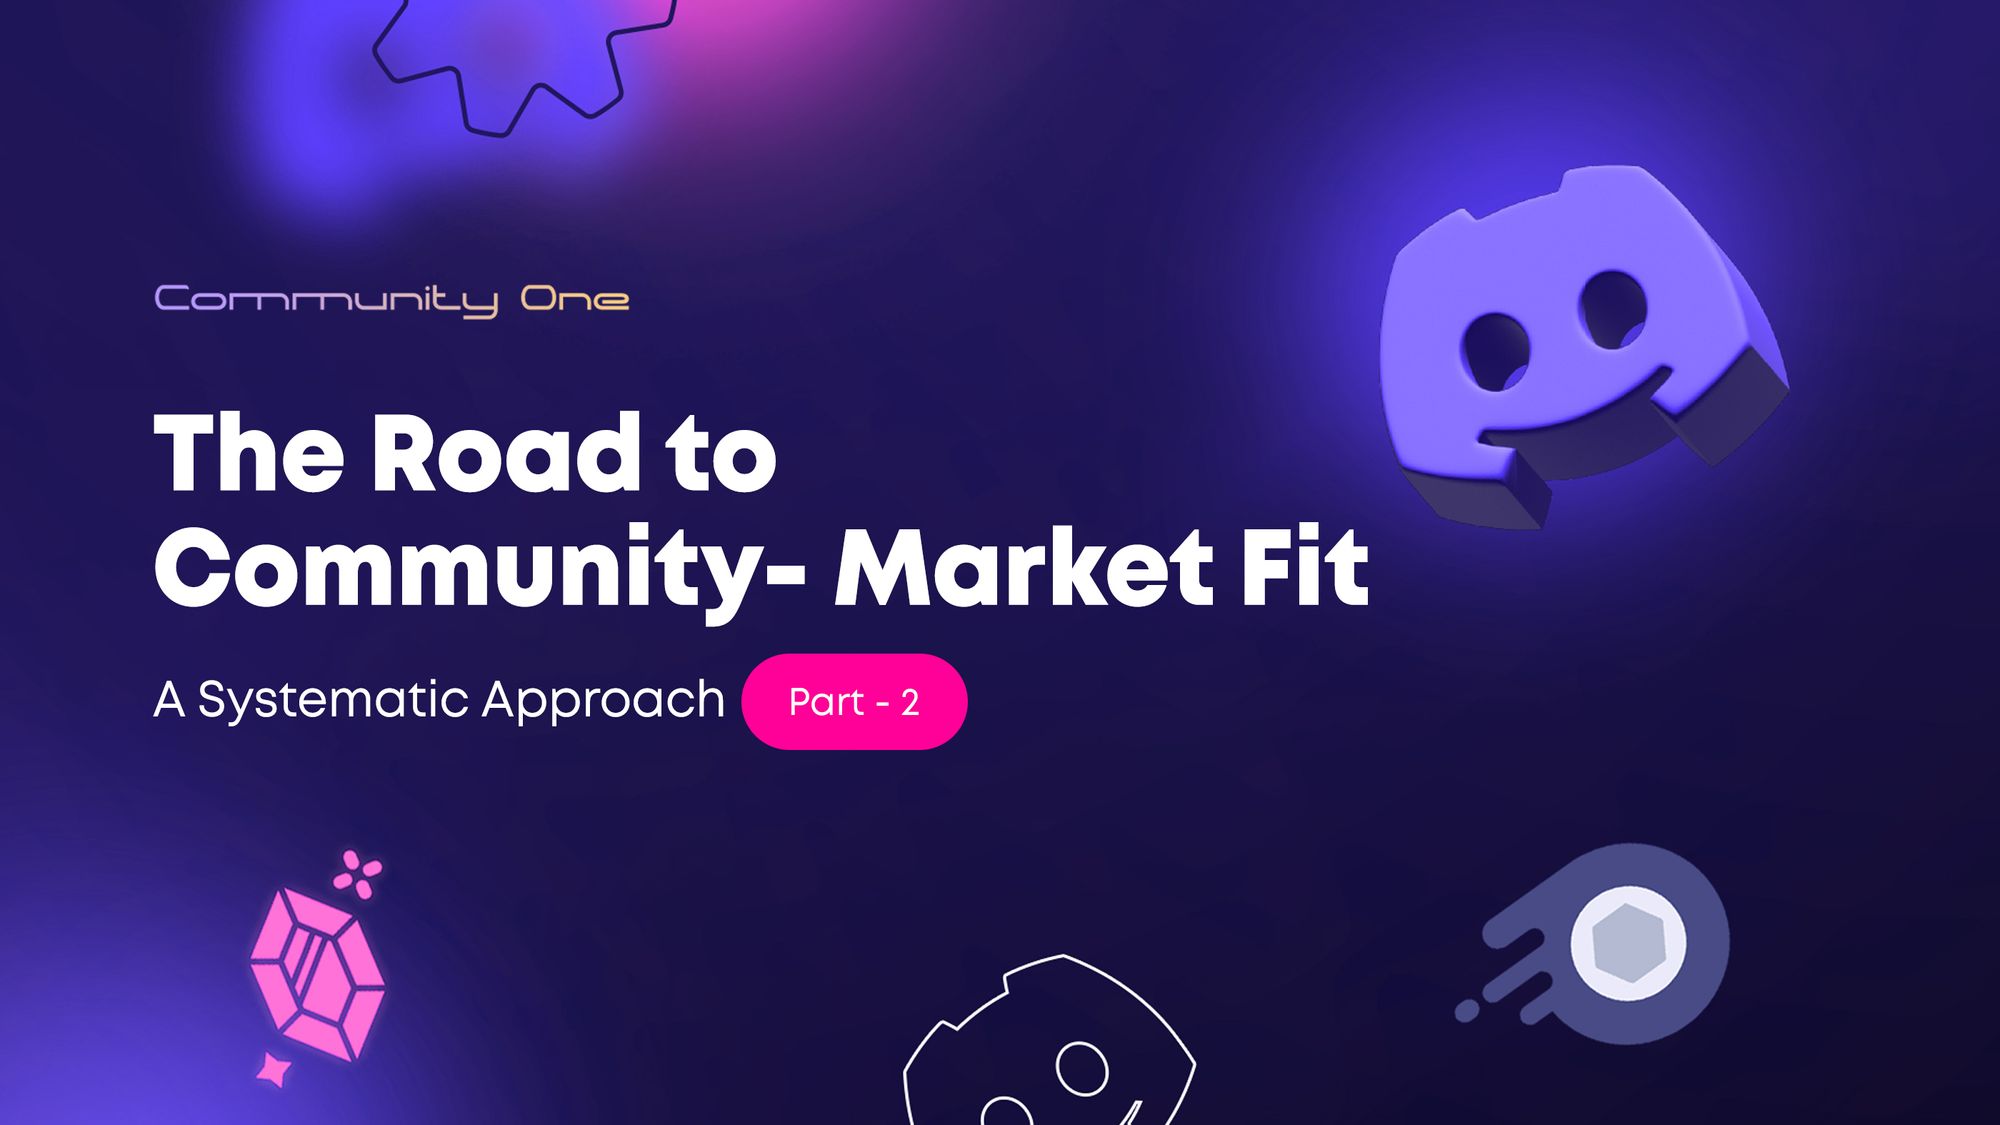 The Road to Community-Market Fit: A Systematic Approach - Part 2